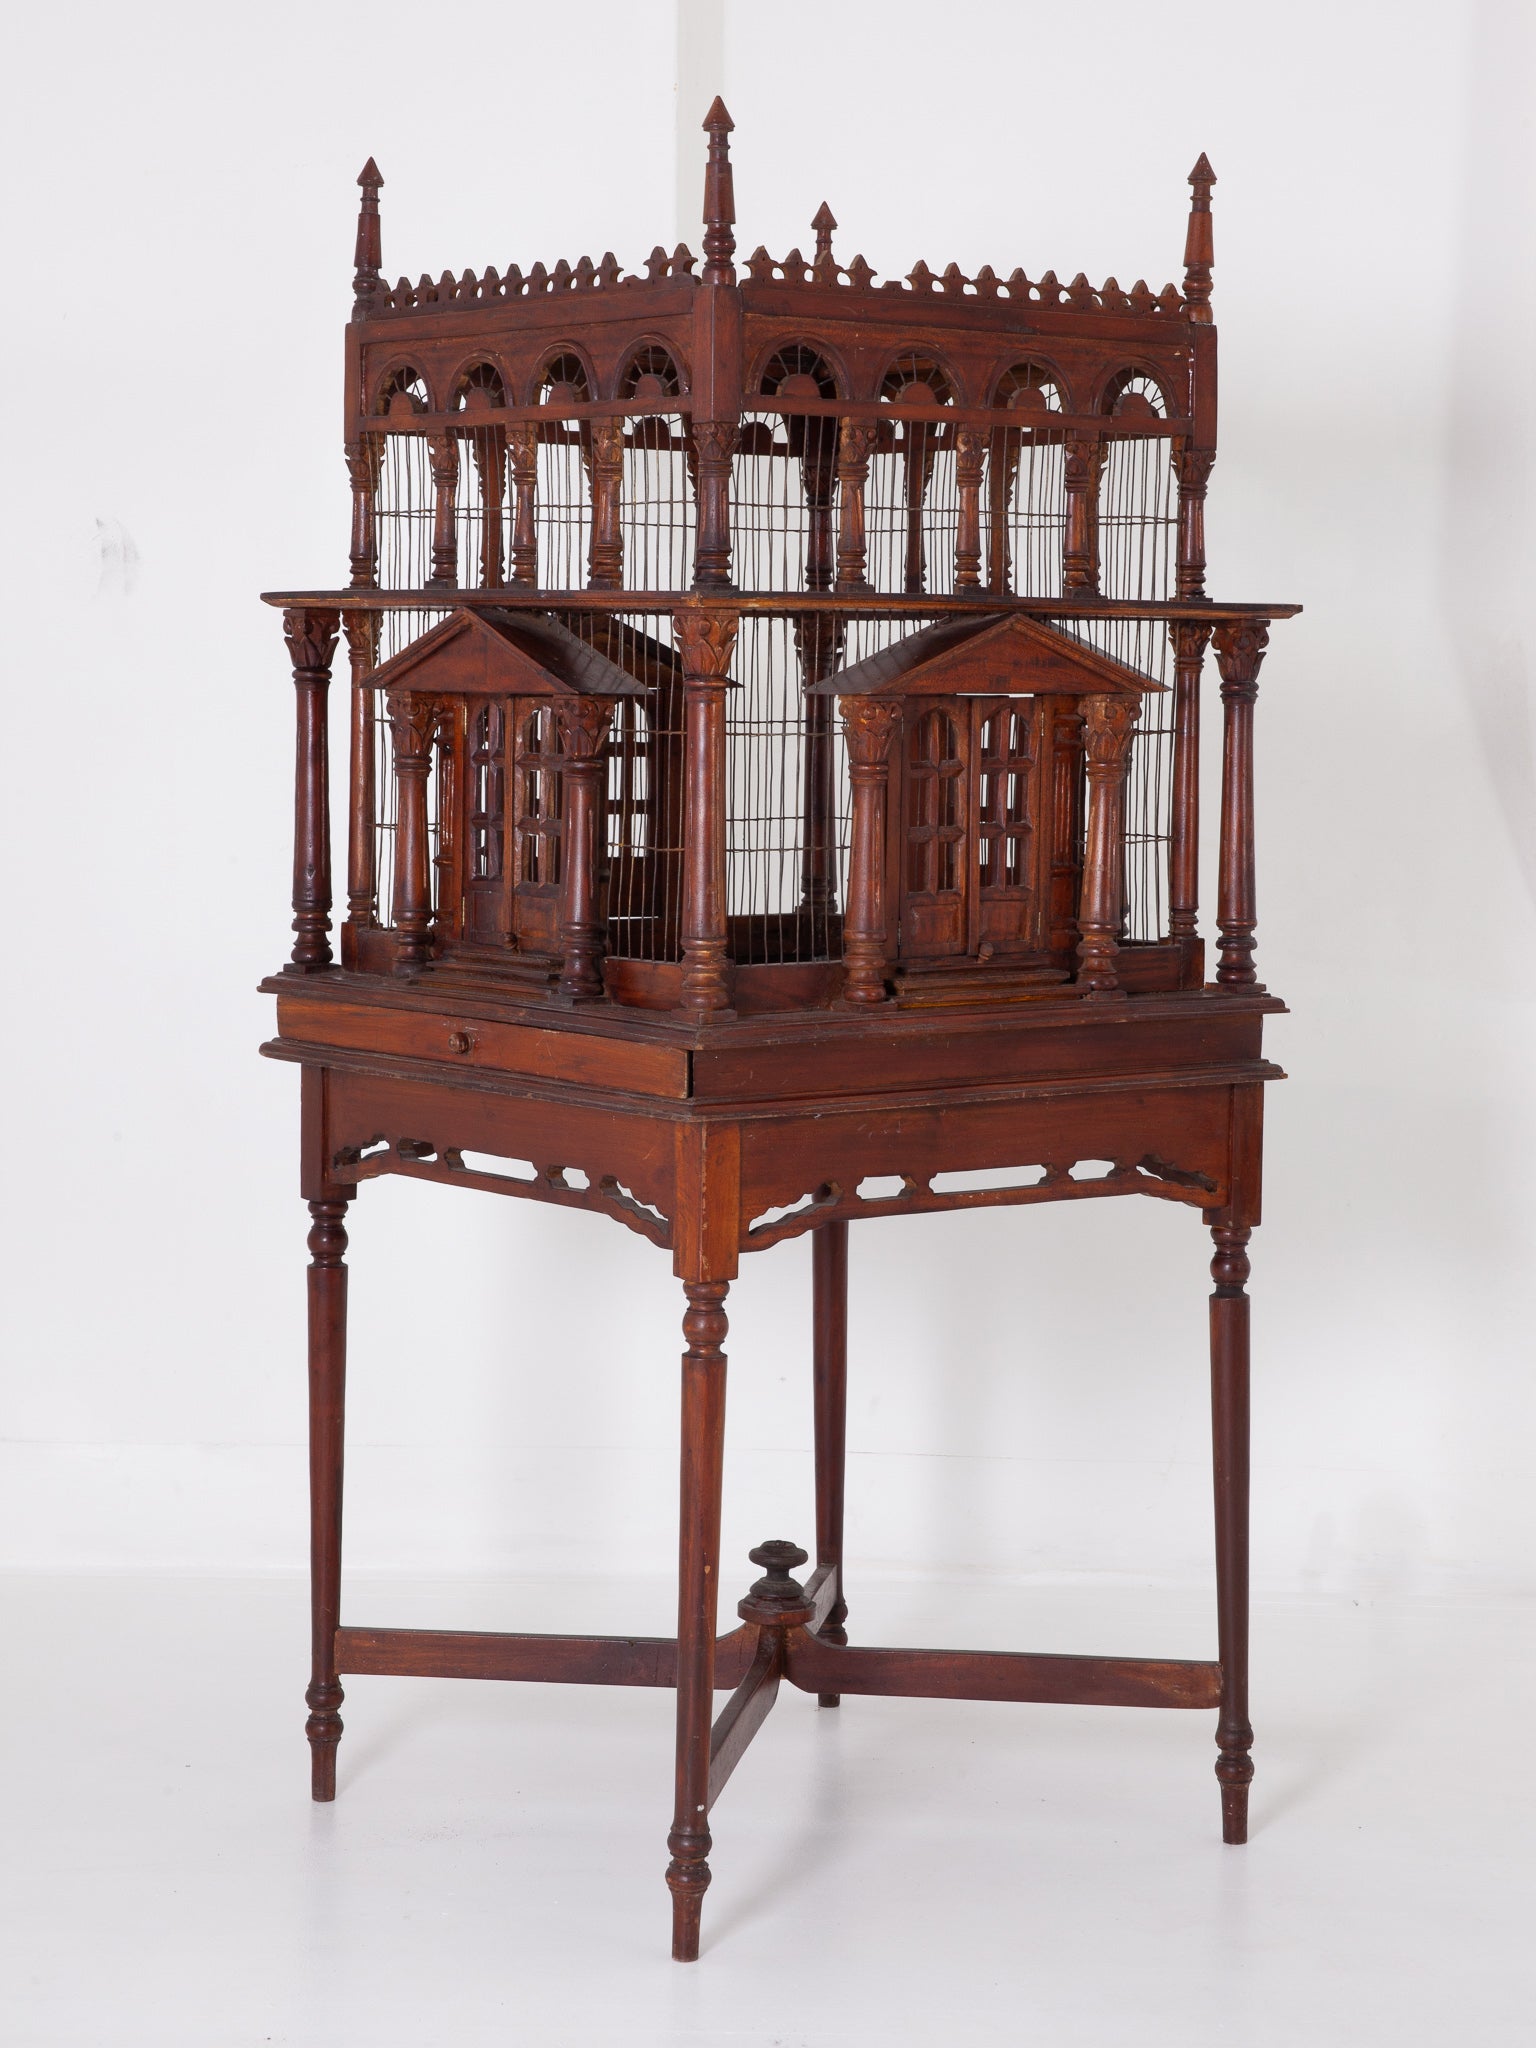 Large Victorian Style Carved Wood Bird Cage on Table Stand at